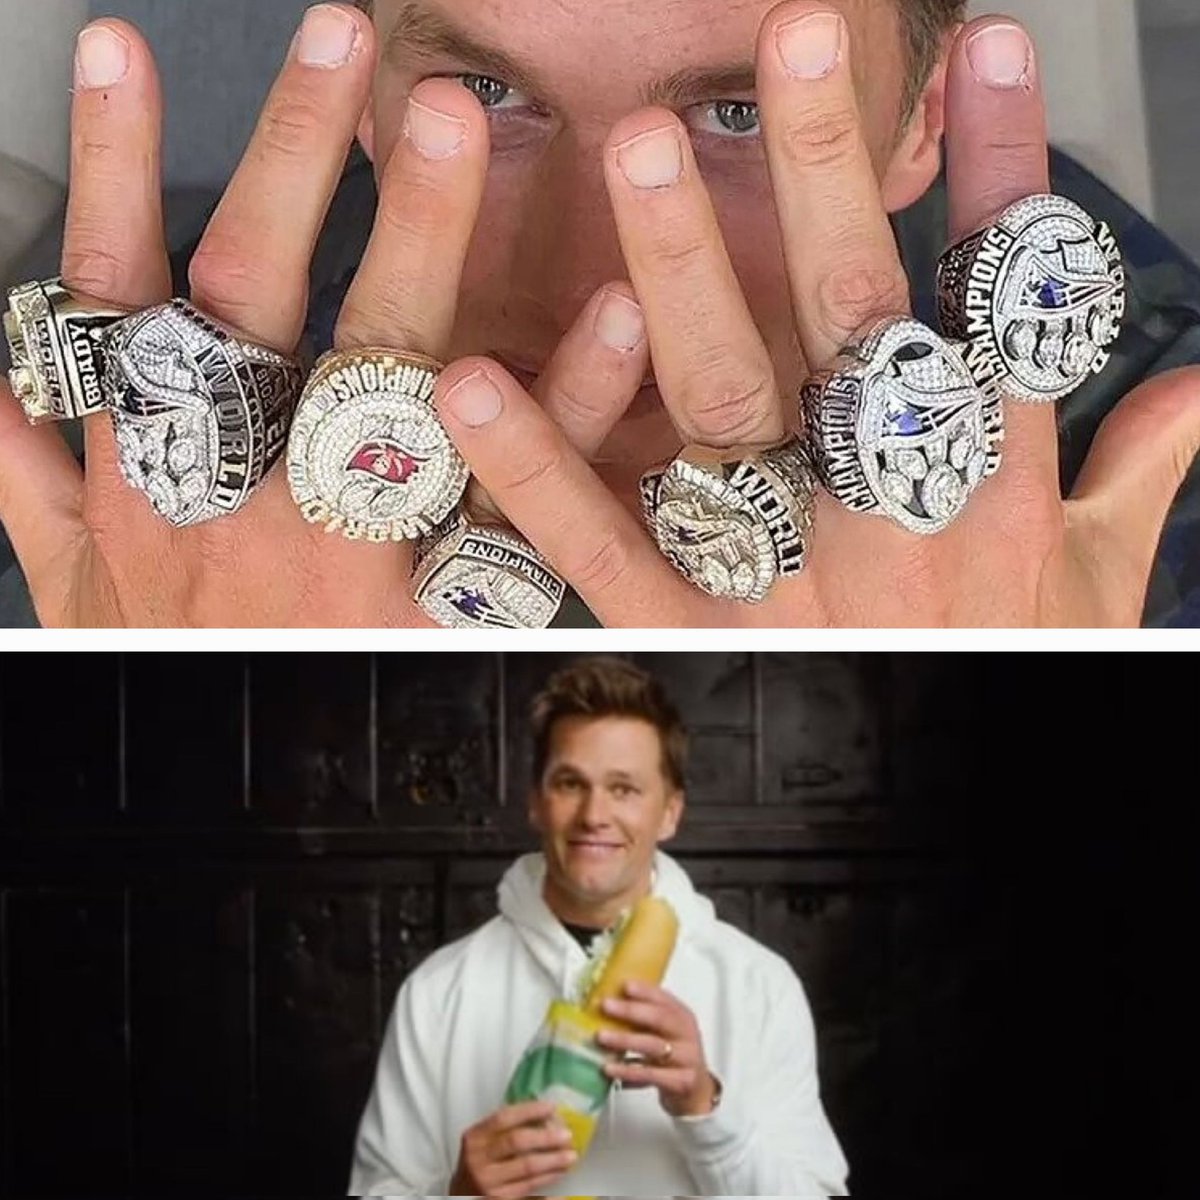 Tom Brady is the GOAT 🐐 he has nothing left to prove on the field. 🏈
Speculation on what he does & where he goes is irrelevant, he's earned it.✨️ Only thing we should be speculating now is whether he really eats Subway or not.🤔 #TB12 #NFL #EatFresh